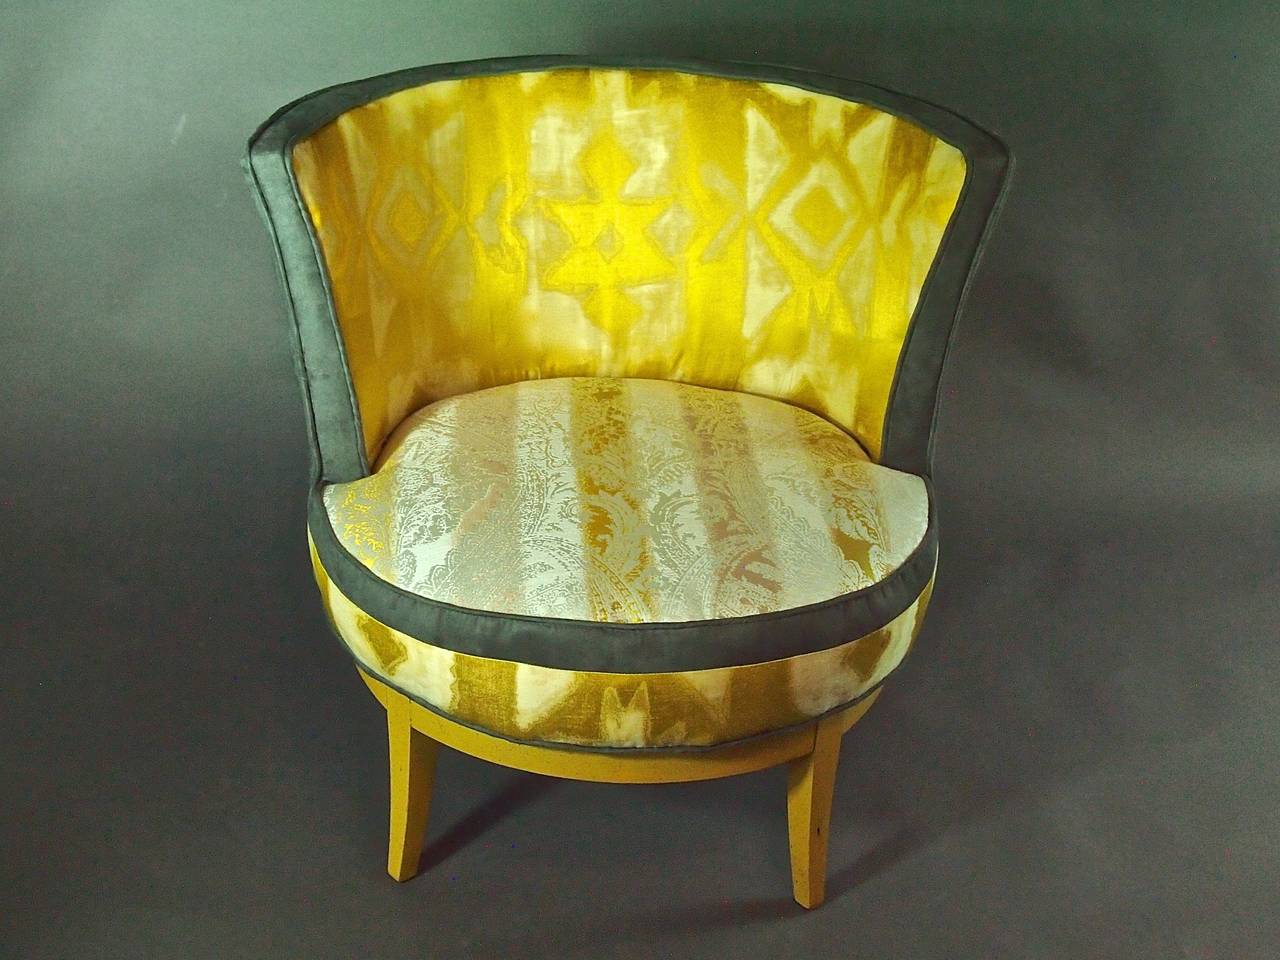 A small swivel chair that's truly worthy of a queen! Original yellow stained wood is enhanced by a royal yellow silk pulled tight to place a star in the center. Inspired by some of Napoleon's chairs I saw at the Louvre last summer. Fabric design is